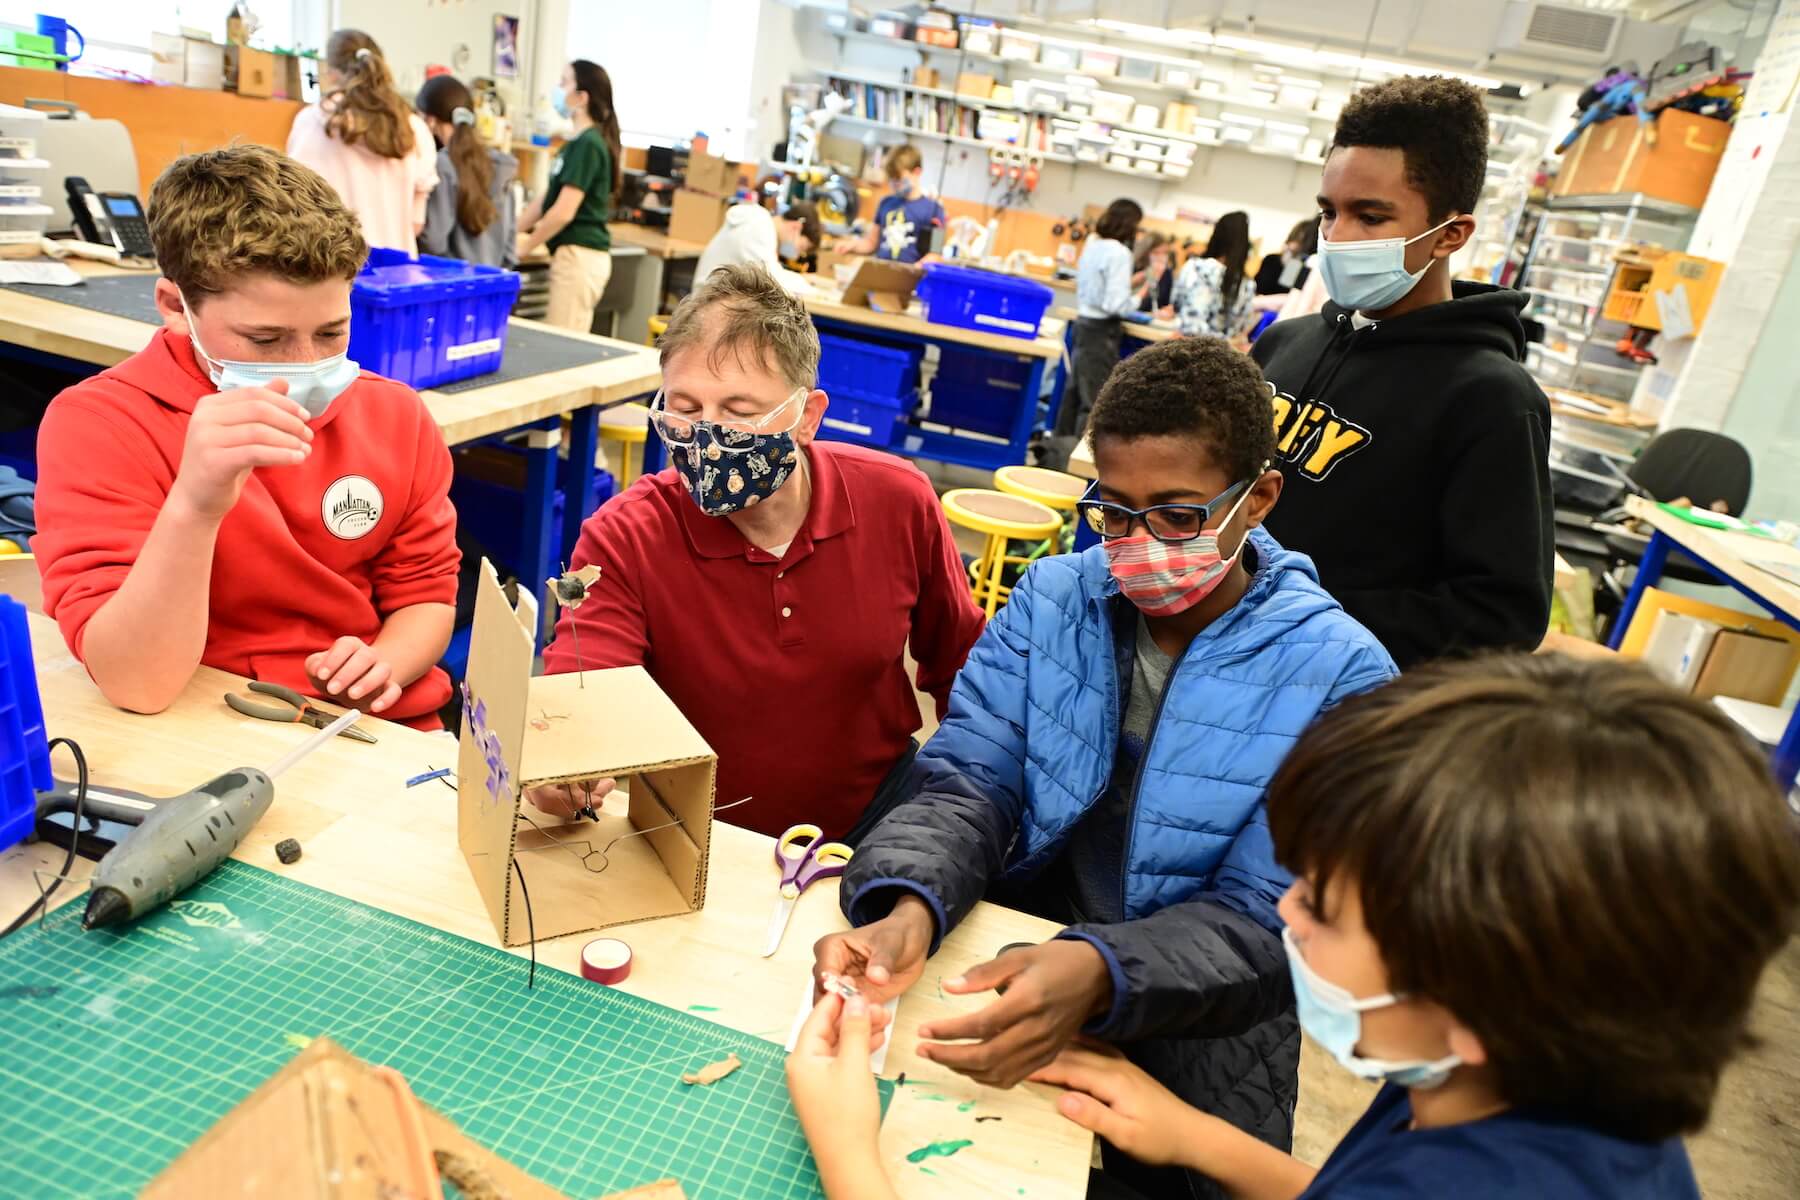 Ethical Culture Fieldston School Fieldston Middle students gather around a work table to build project with cardboard